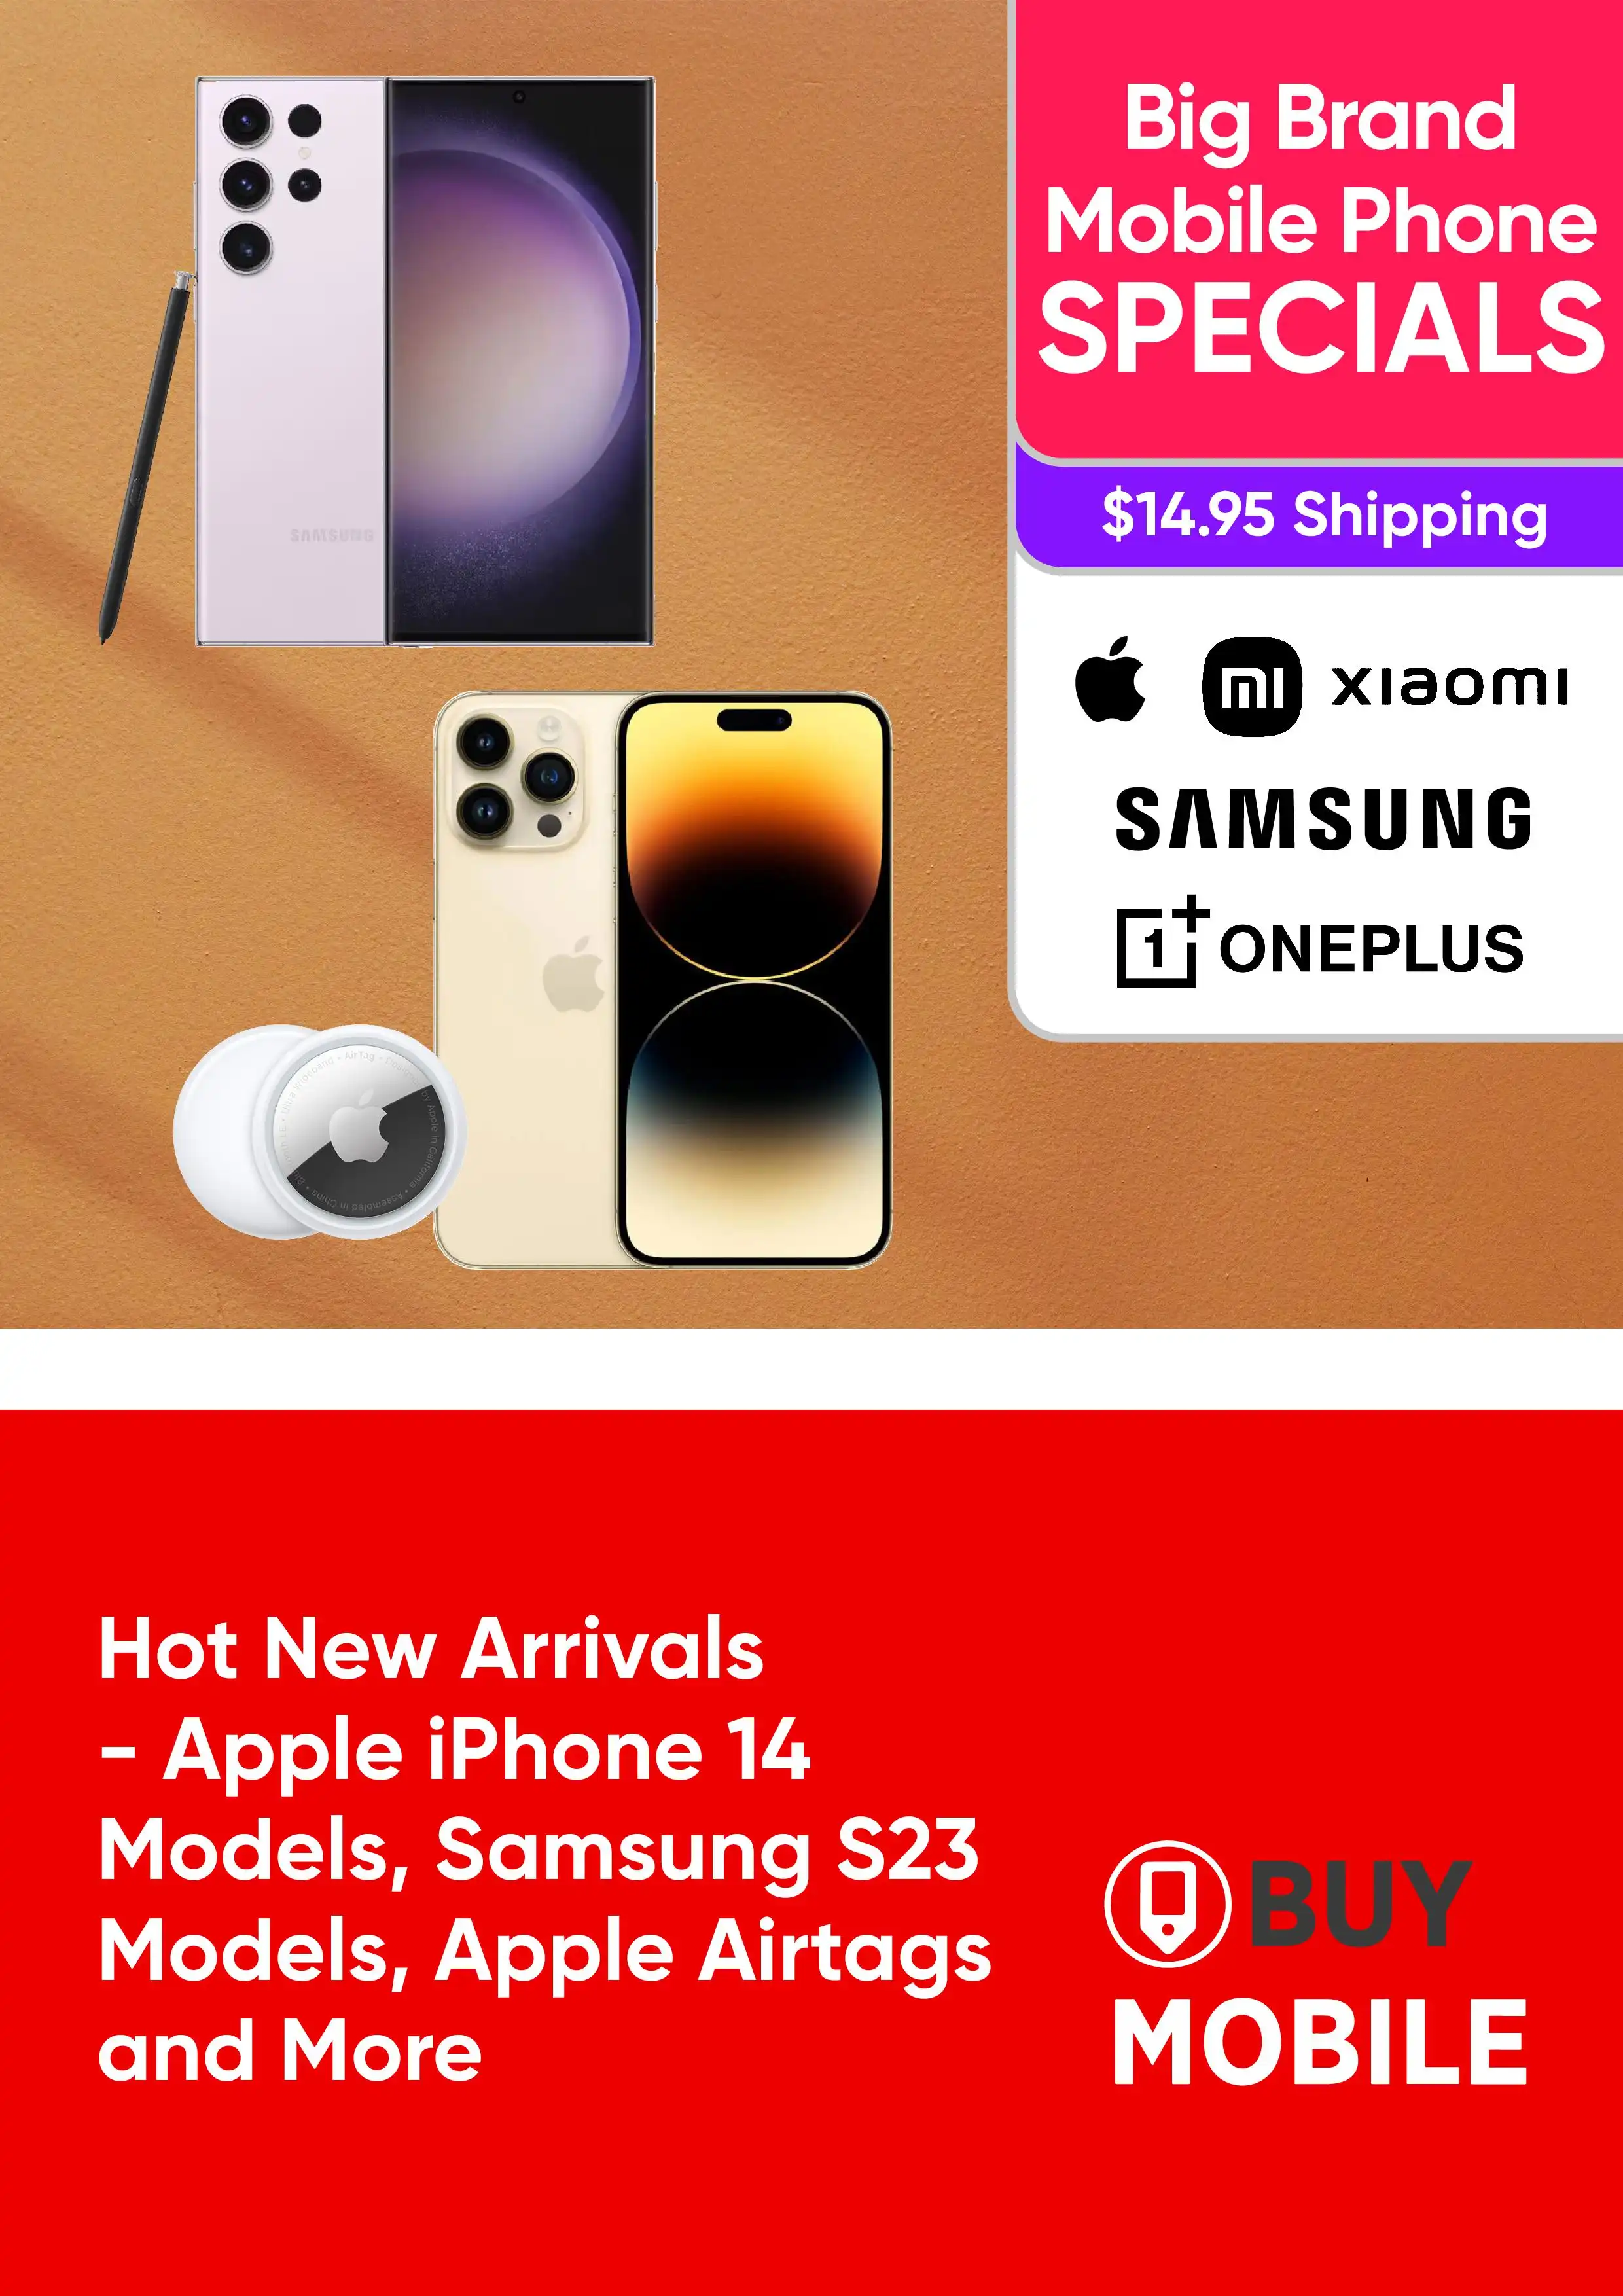 Hot New Arrivals - Apple iPhone 14 Models, Samsung S23 Models, Apple Airtags and More